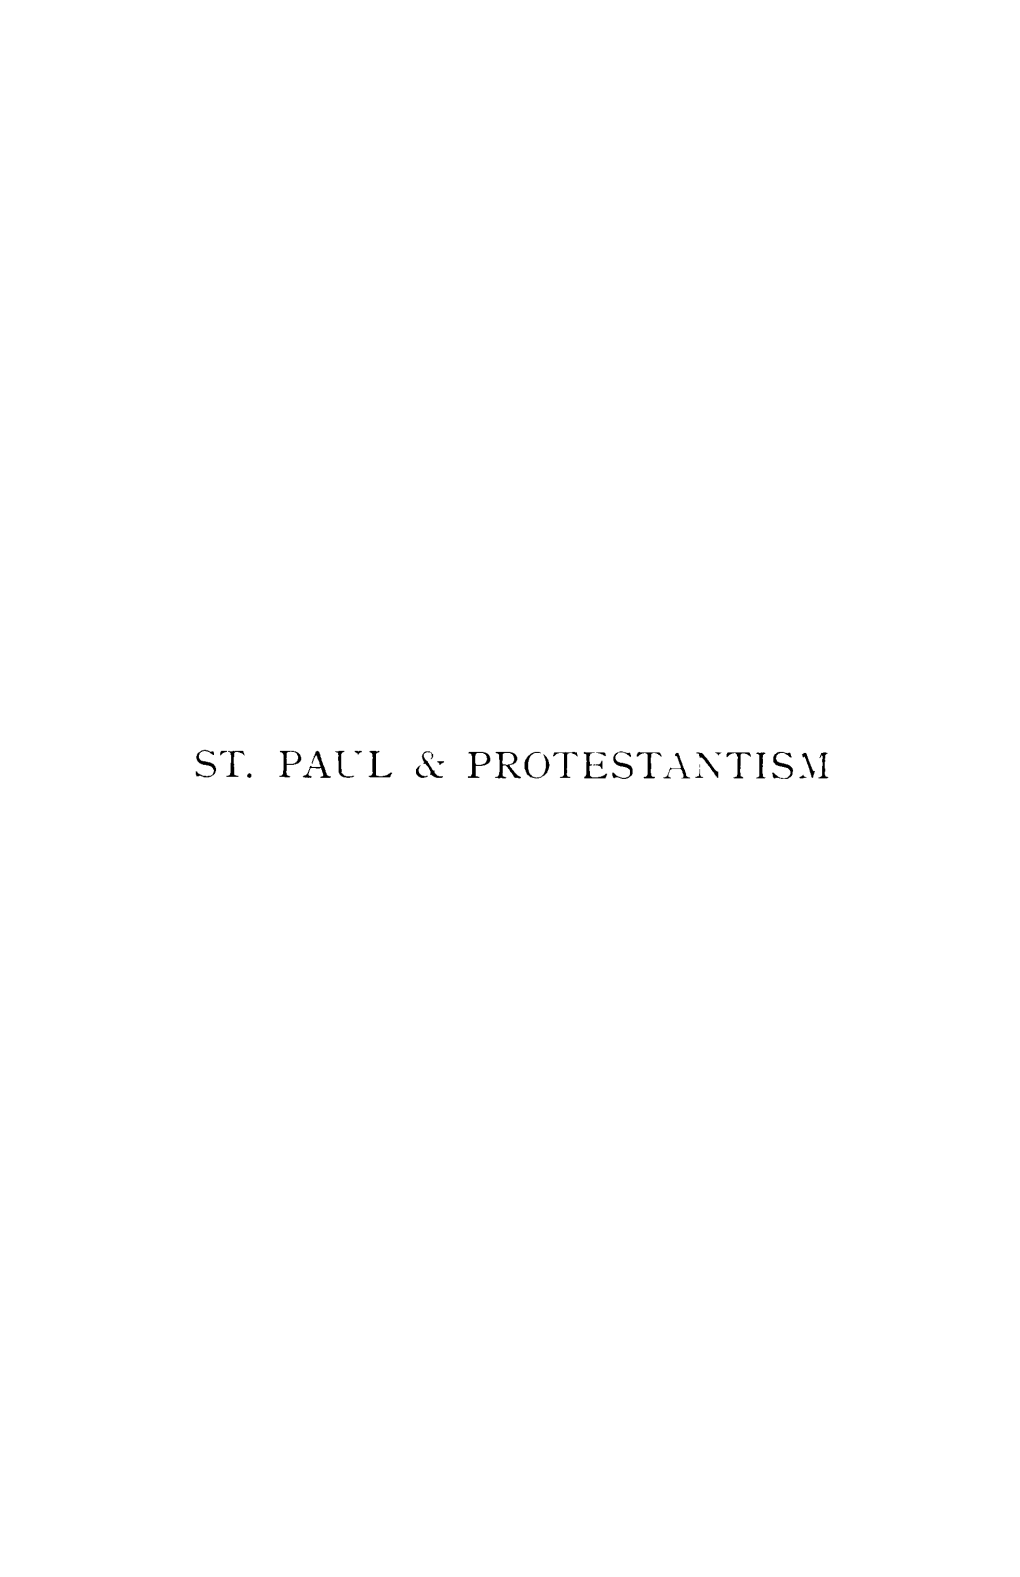 ST. PAUL Å: PROTESTANTISM " \Ve Often Read the Scripture Withoiu Comprehending Its Full Meaning; However, Let Us Not Be Discouraged